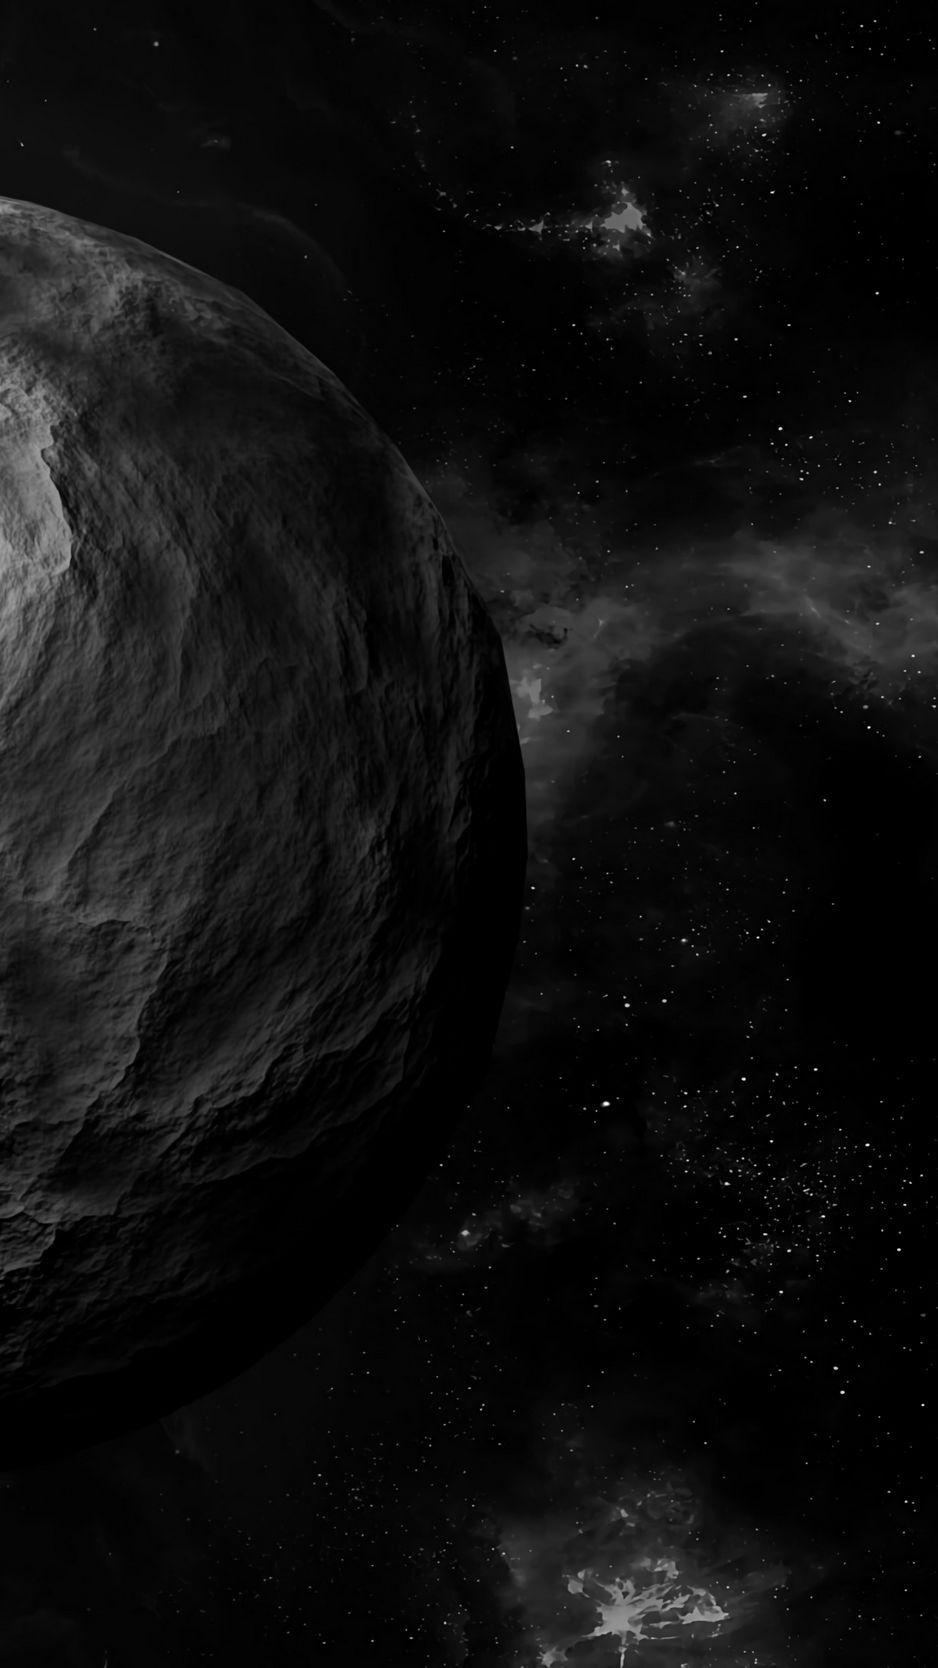 Black and White Planet Wallpapers - Top Free Black and White Planet